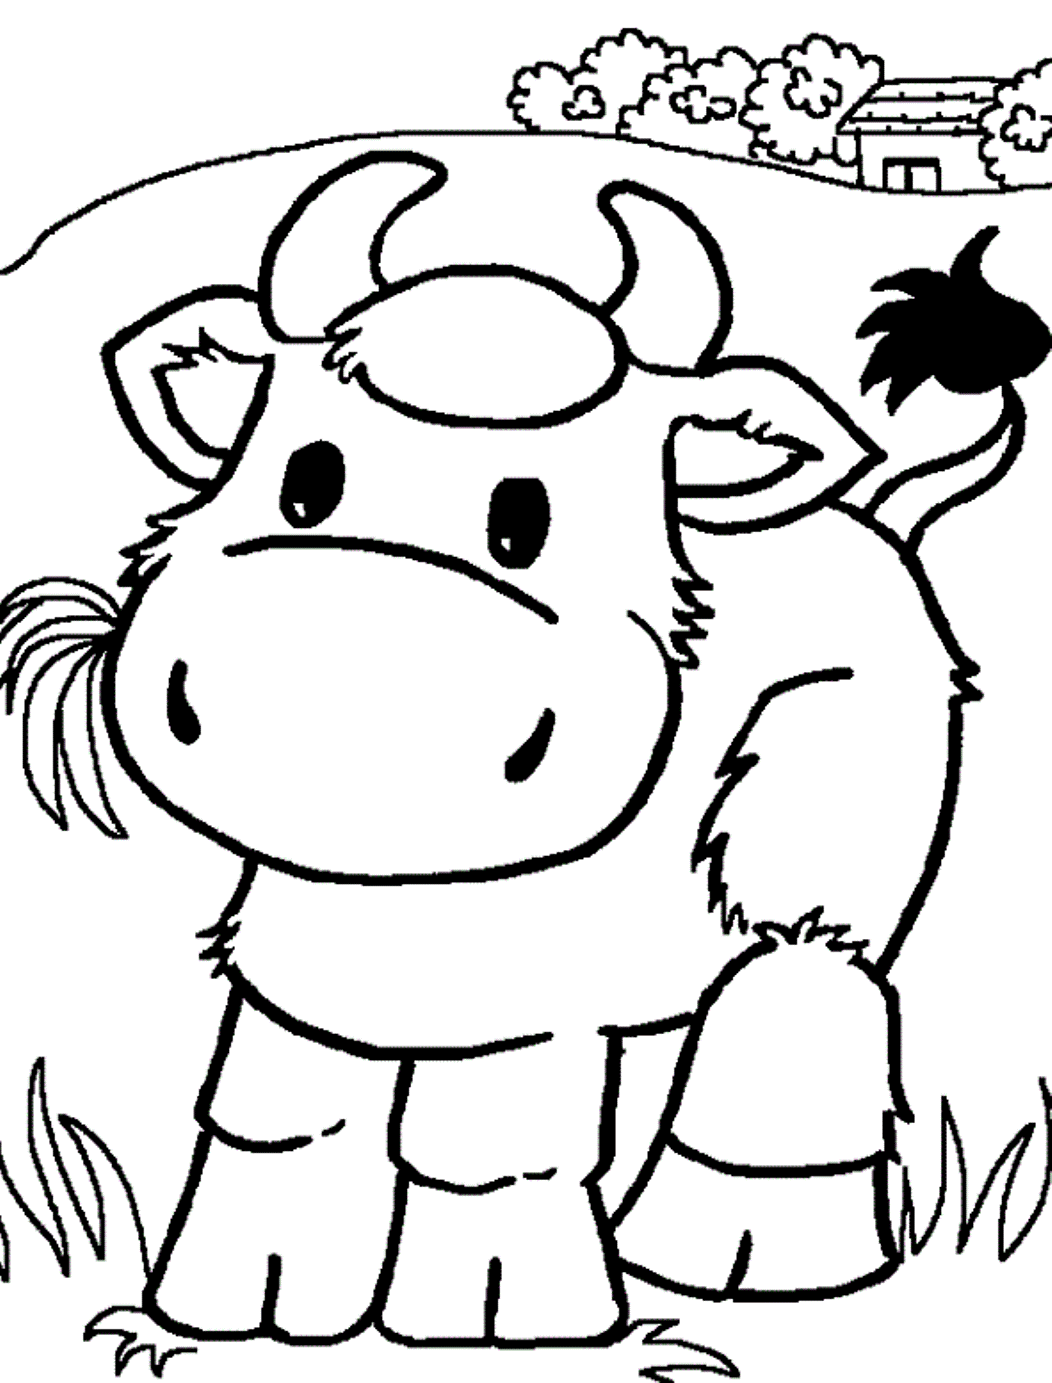 coloring pages of cows - Clip Art Library